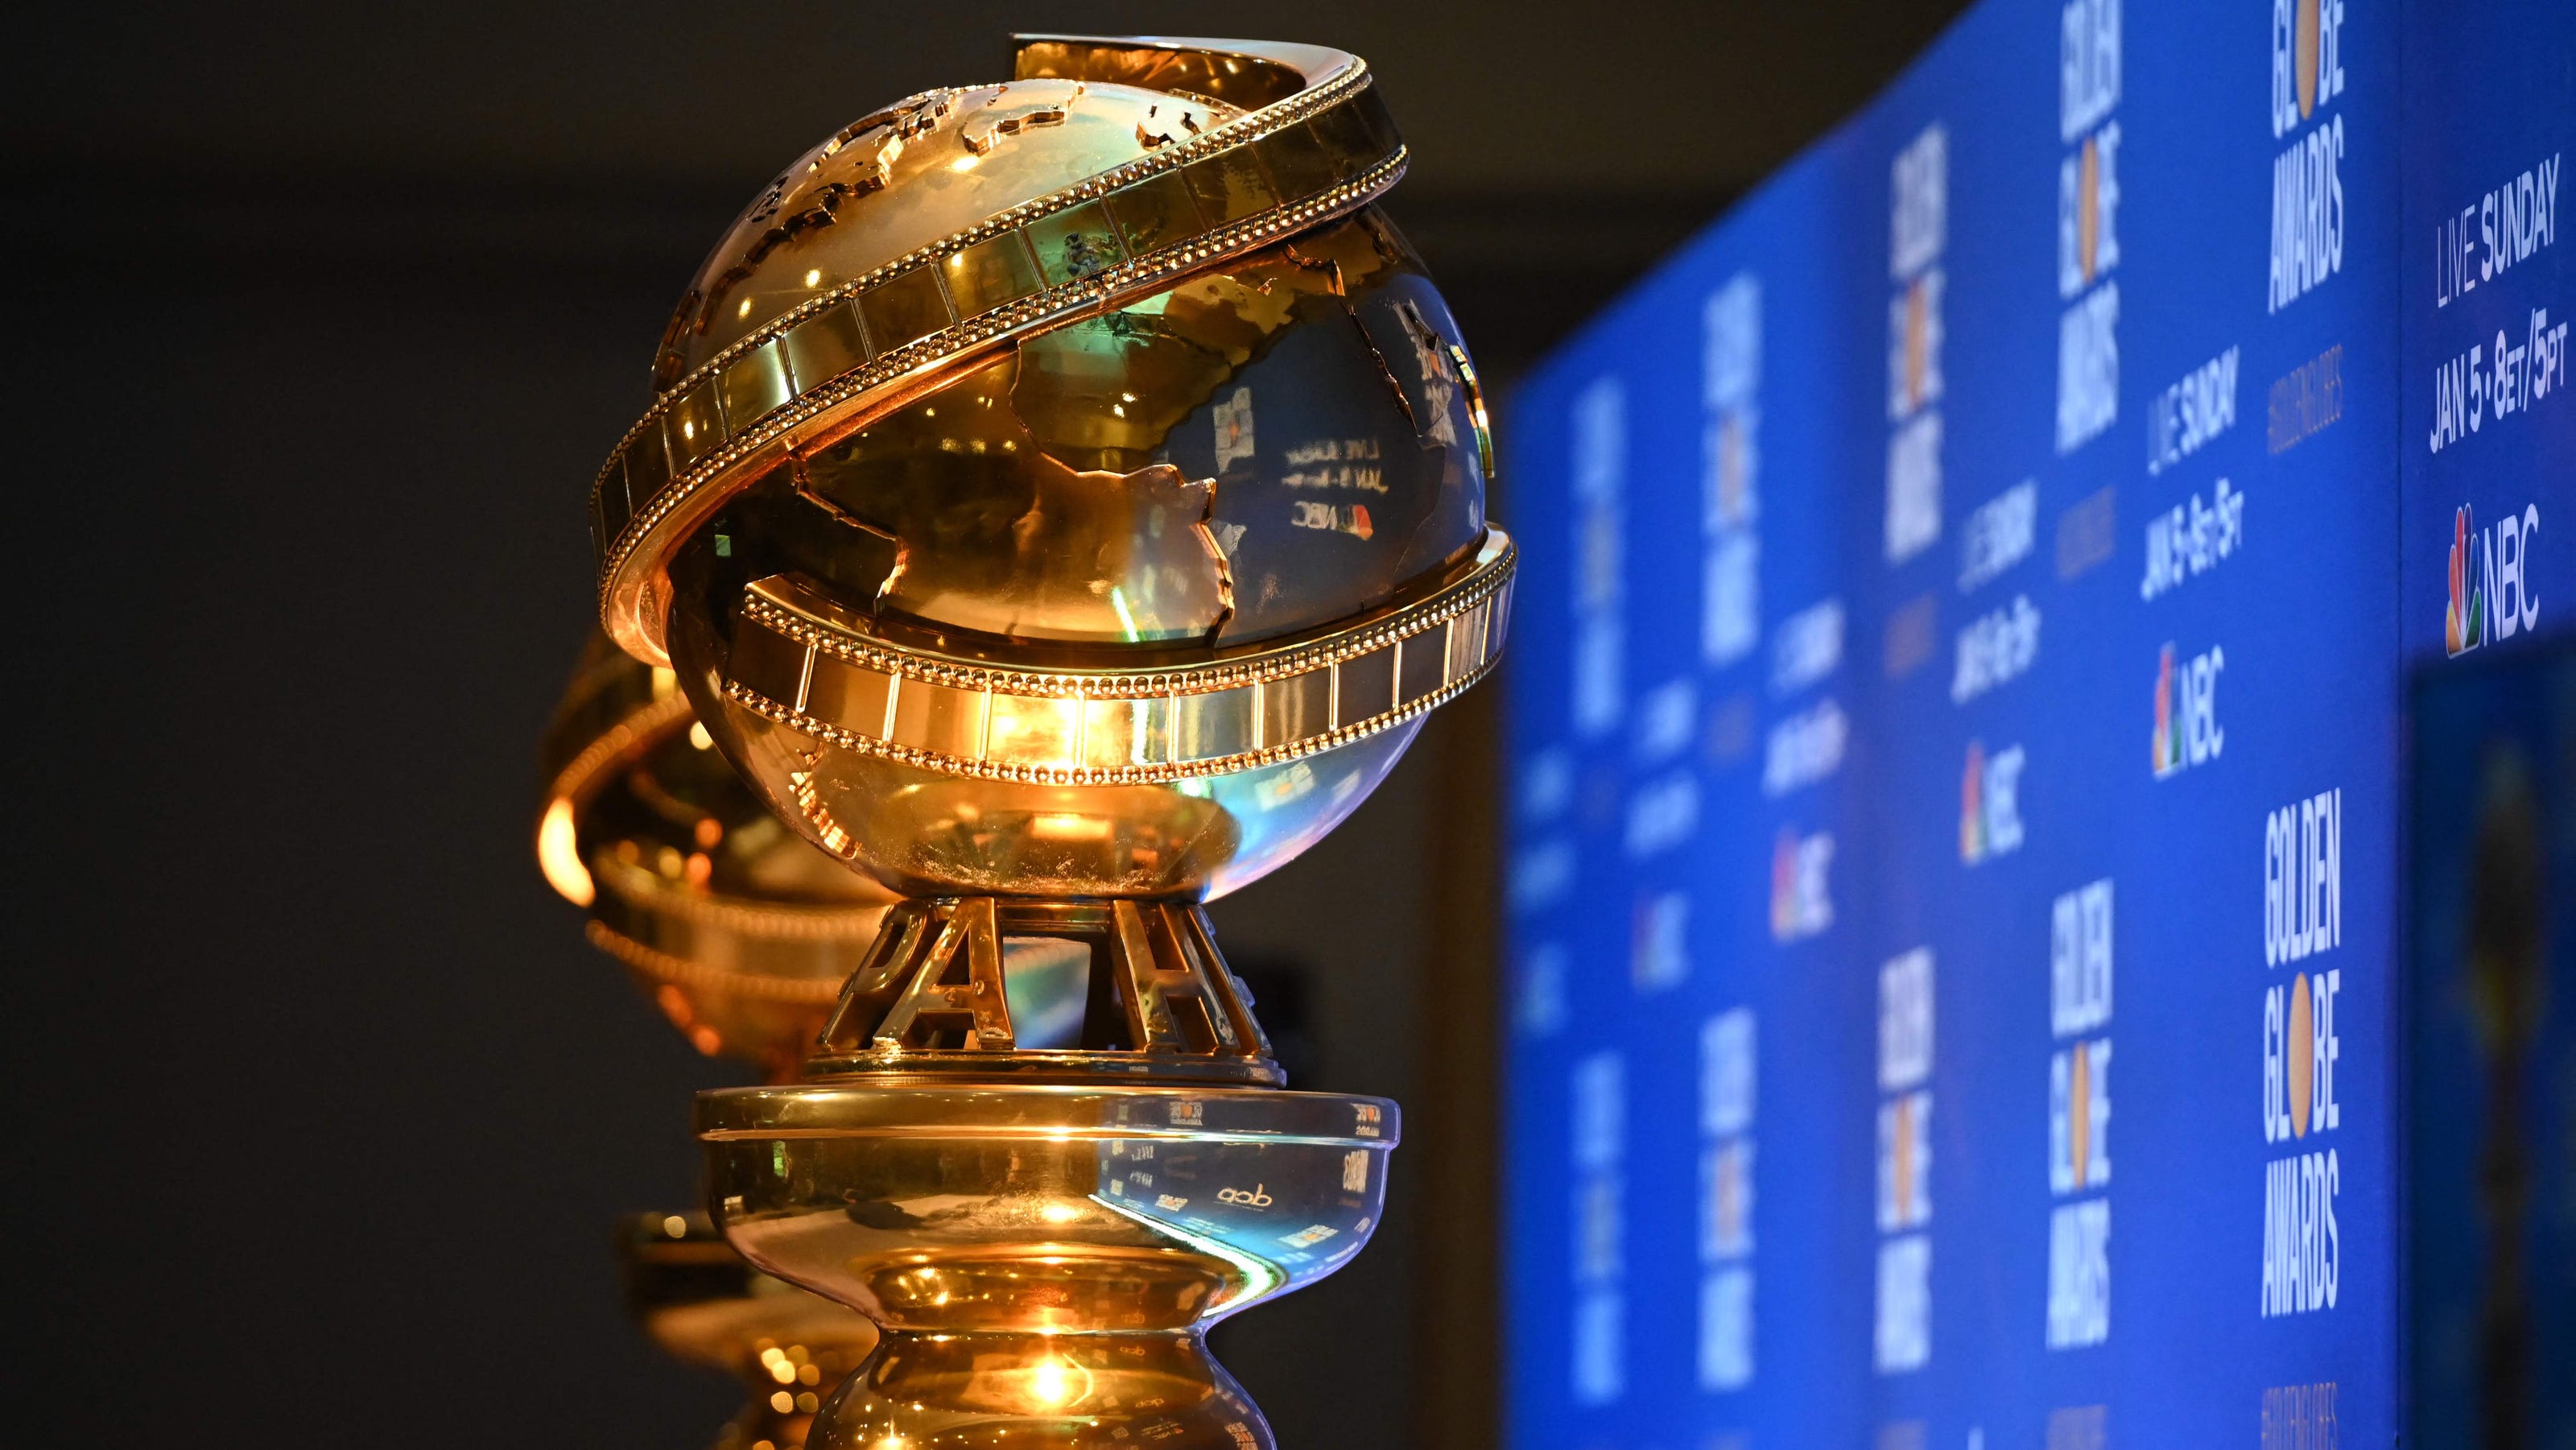 Golden Globes Controversyplagued awards return to NBC in 2023